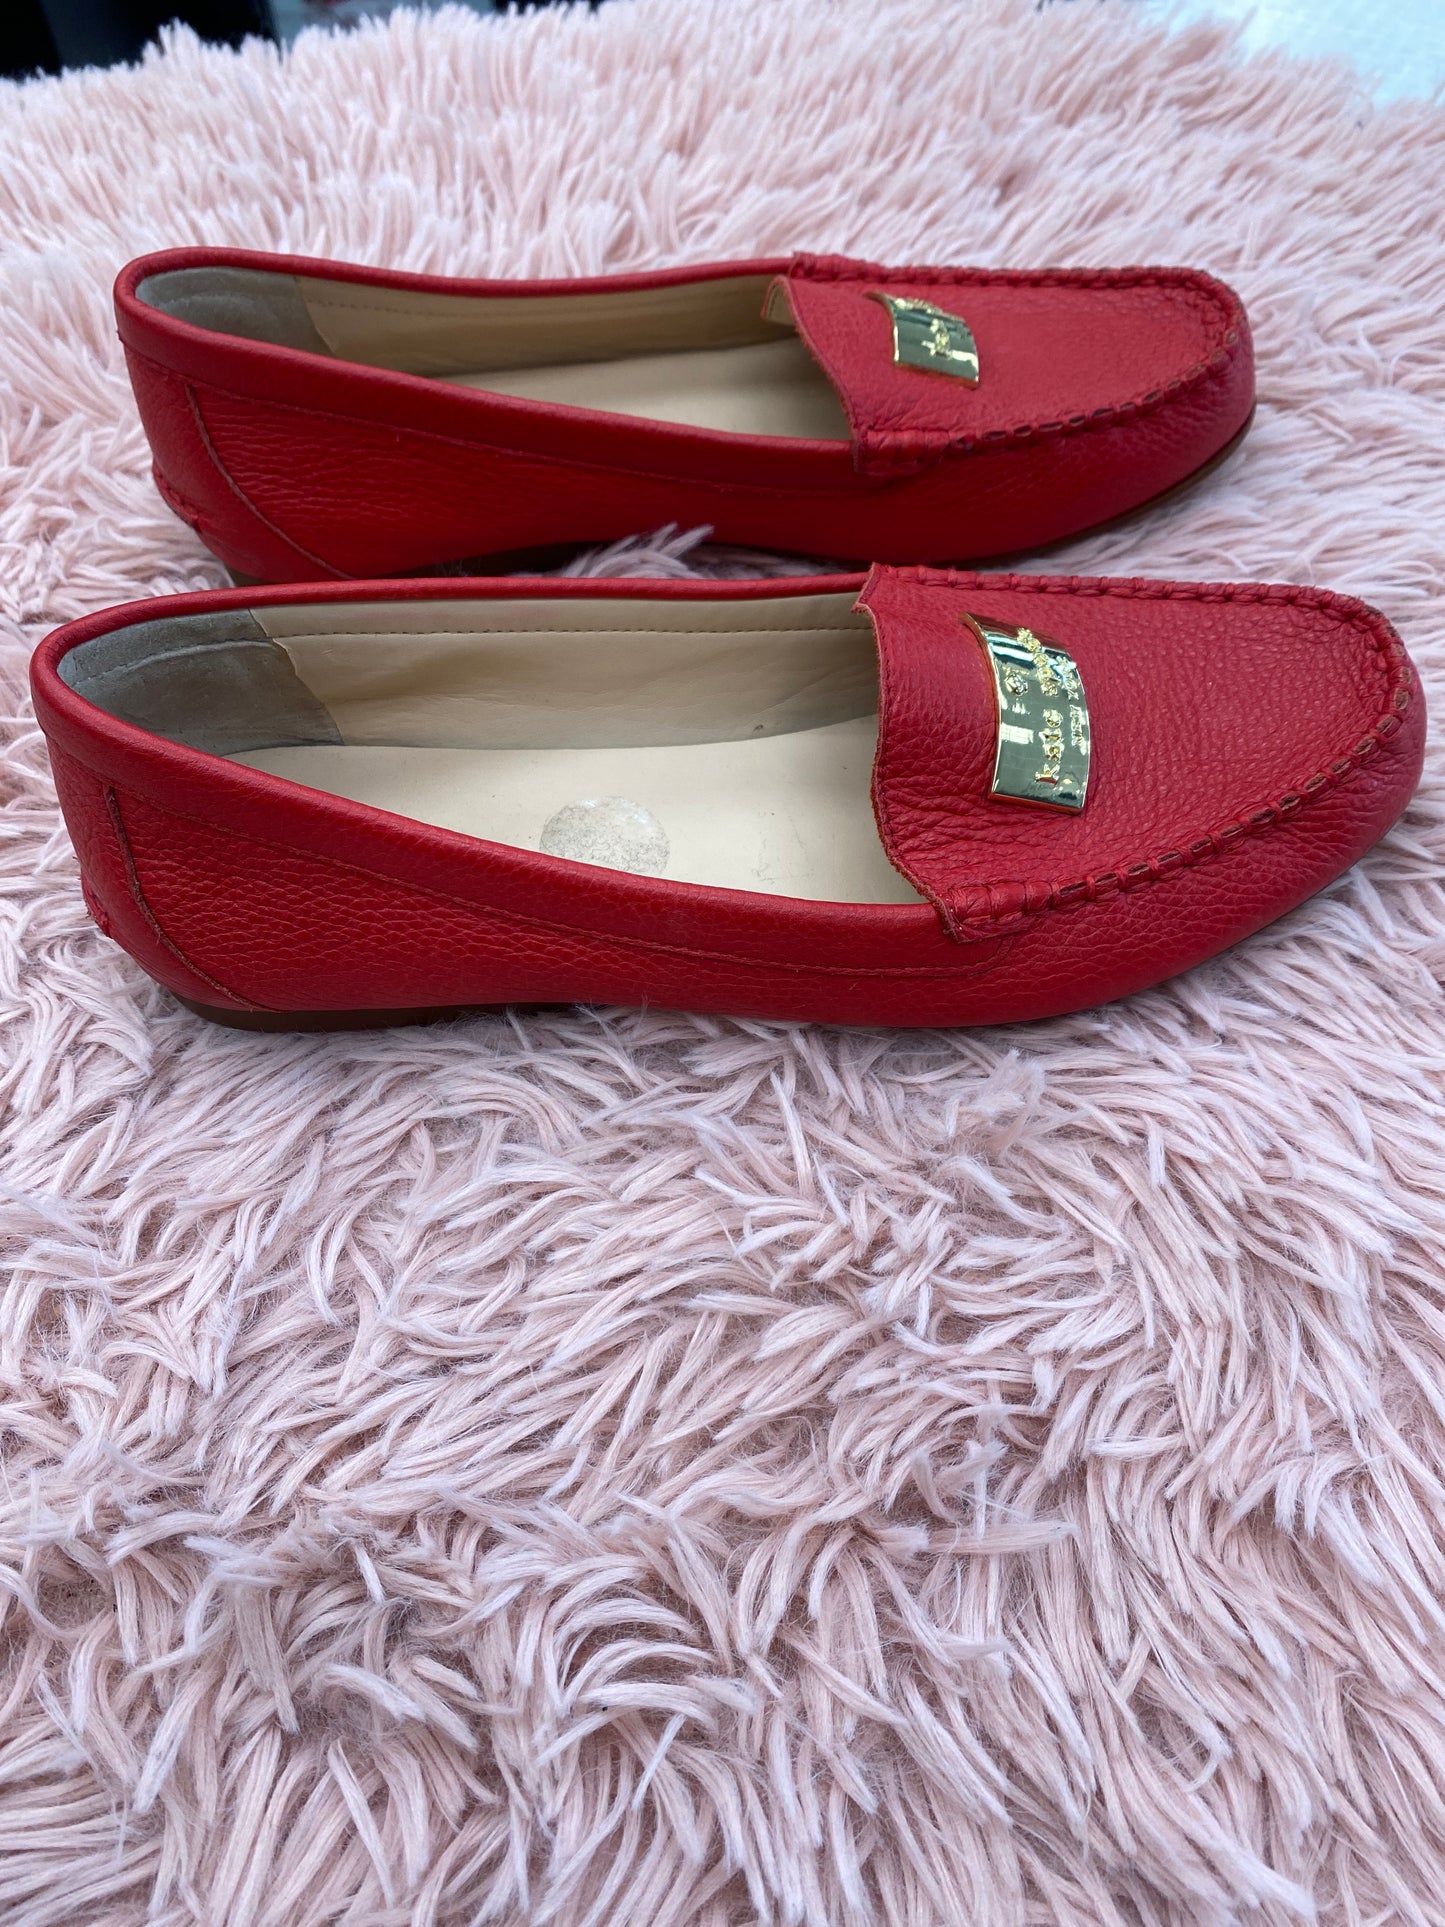 Shoes Flats Loafer Oxford By Kate Spade  Size: 7